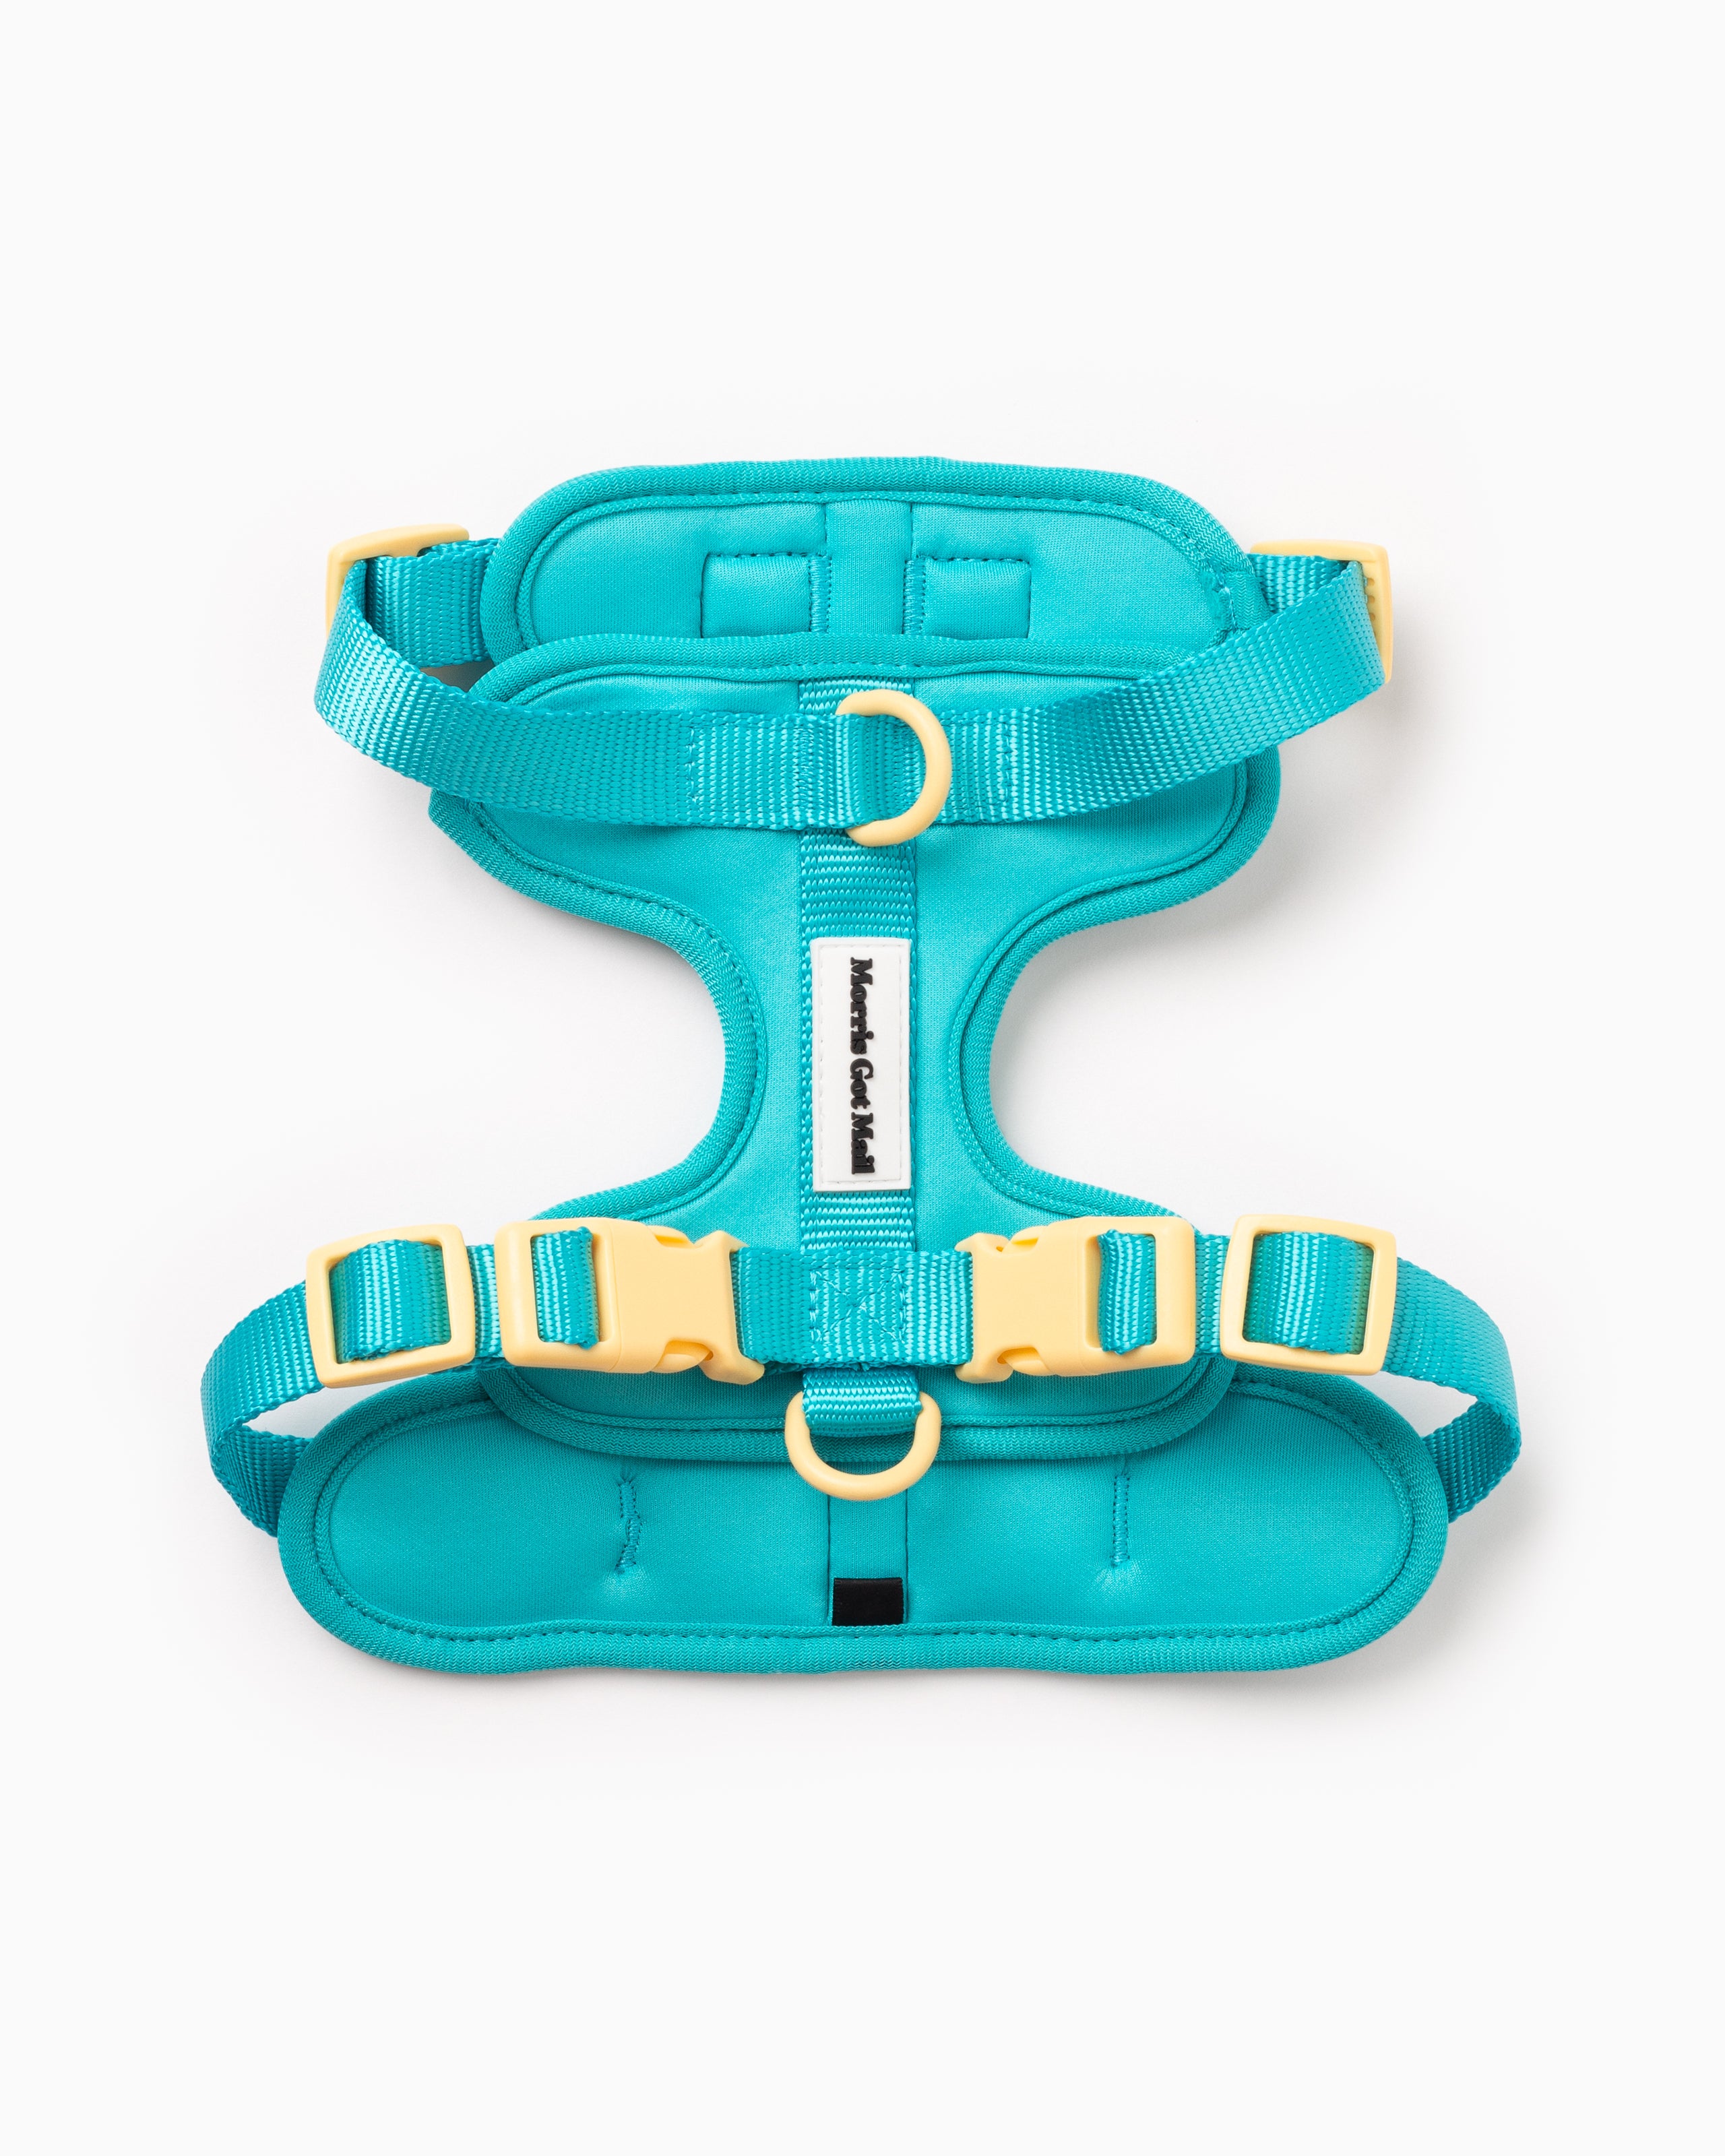 Blue lightweight two tone dog harness with three d-ring attachments & high quality buckles.